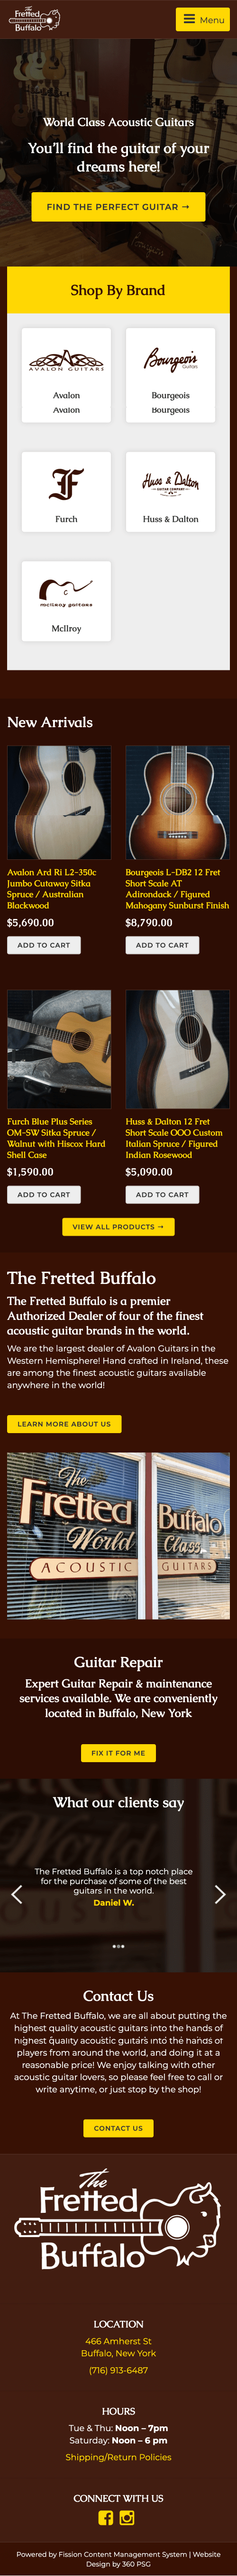 The Fretted Buffalo Website - Mobile